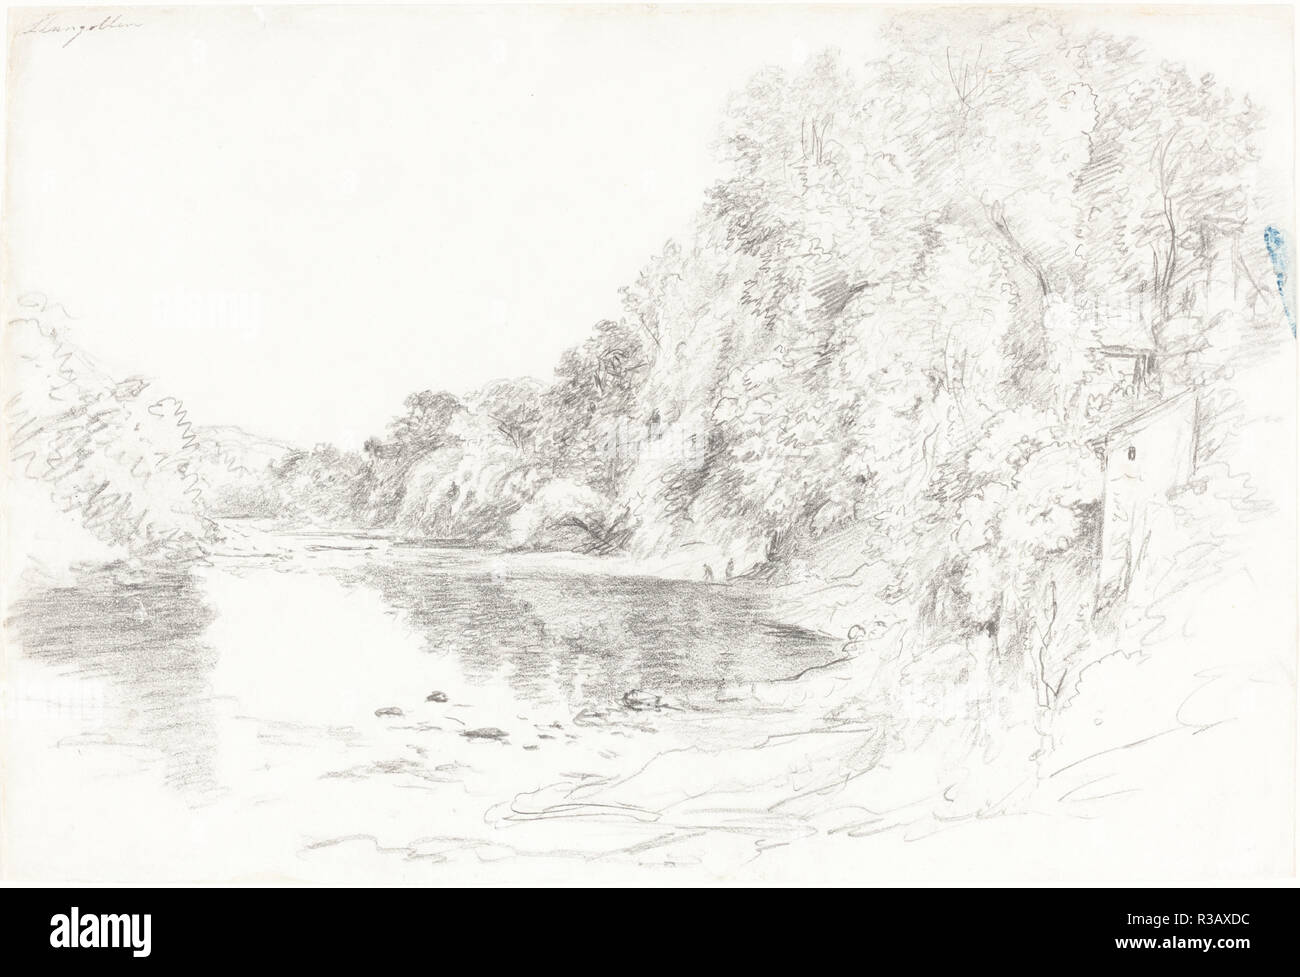 The River at Llangollen. Dated: c. 1795. Dimensions: overall: 20 x 29.4 cm (7 7/8 x 11 9/16 in.). Medium: graphite on wove paper. Museum: National Gallery of Art, Washington DC. Author: John Glover. Stock Photo